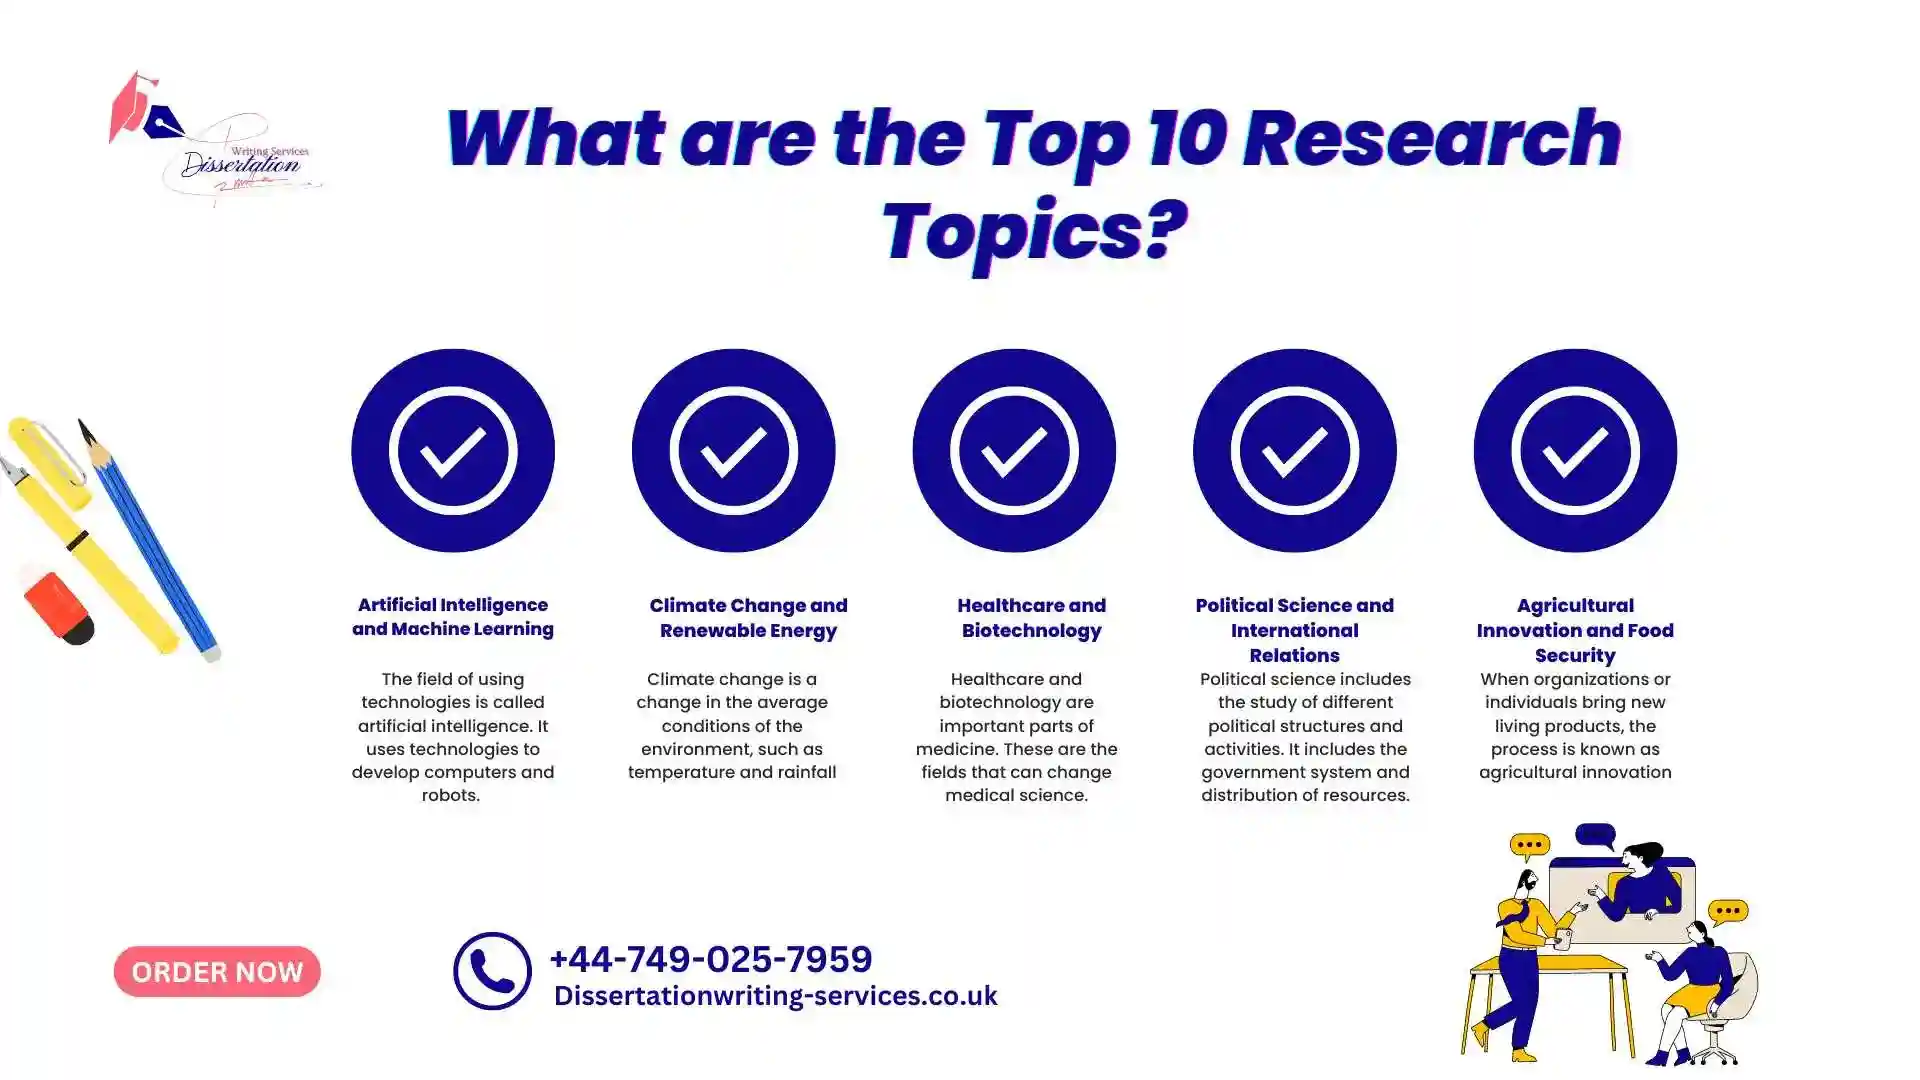 What are the Top 10 Research Topics